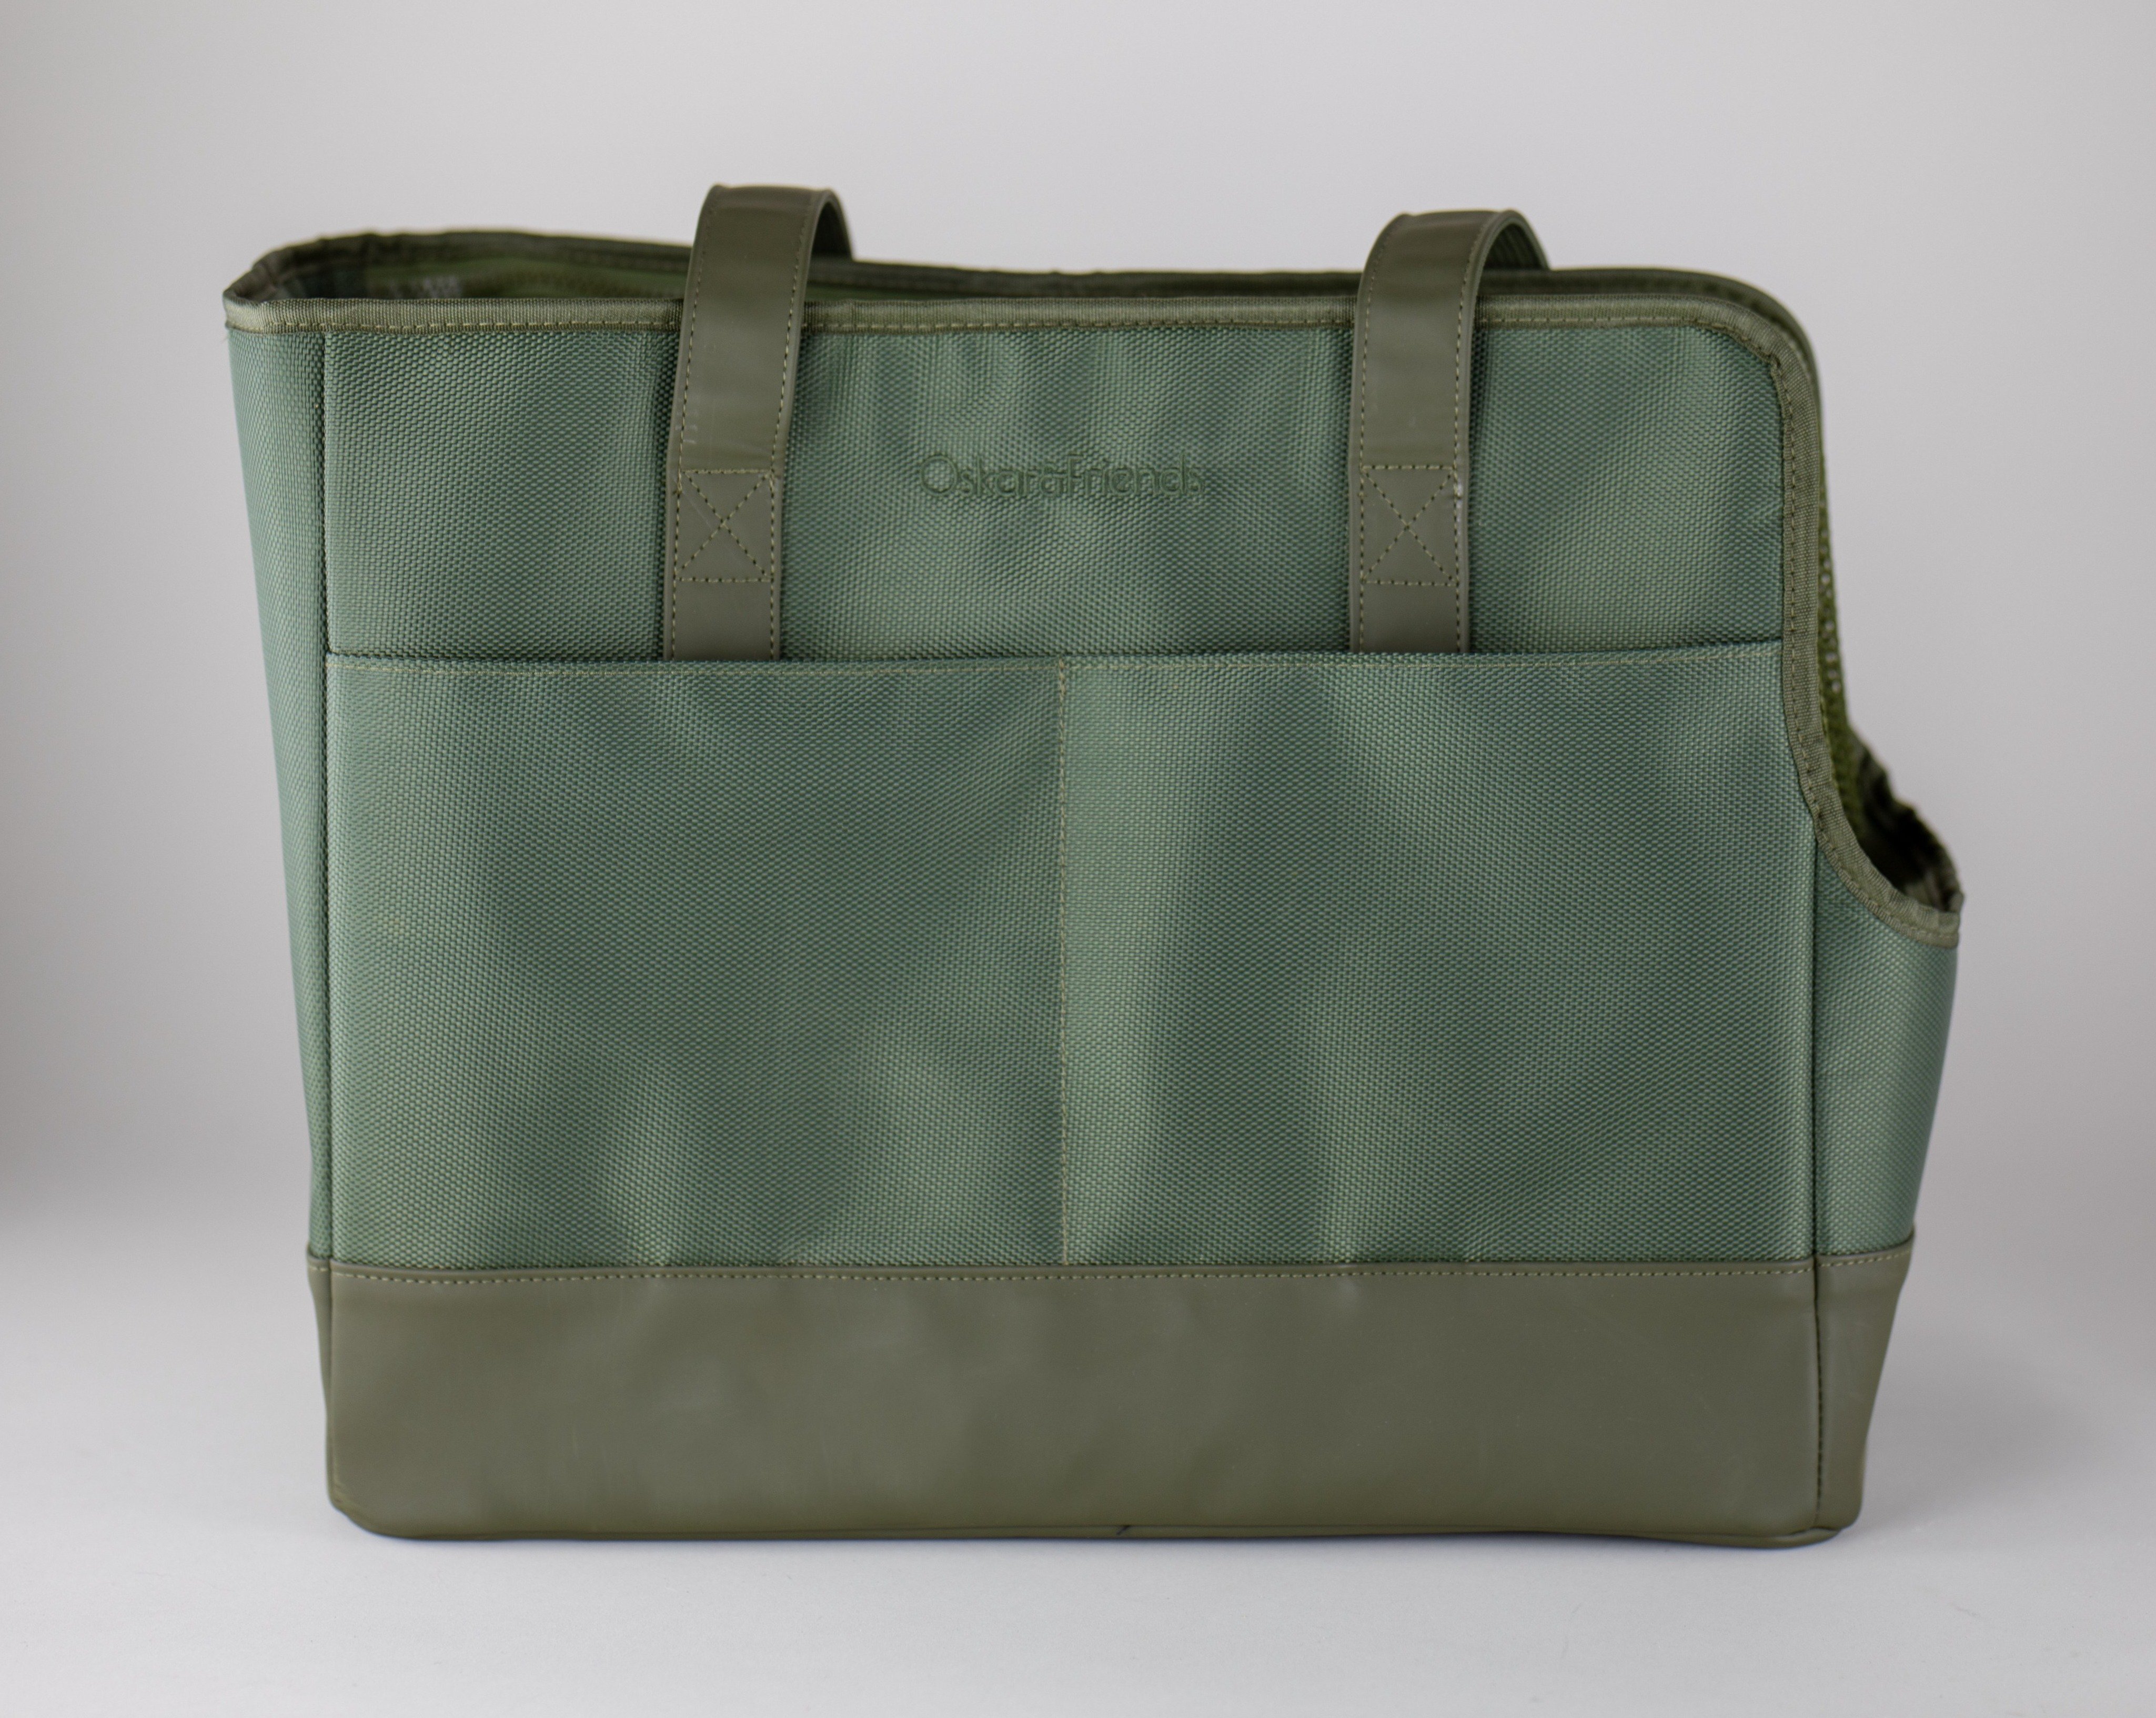 Sage Green Pet Tote Bag for Small Dogs and Cats by Oskar&Friends